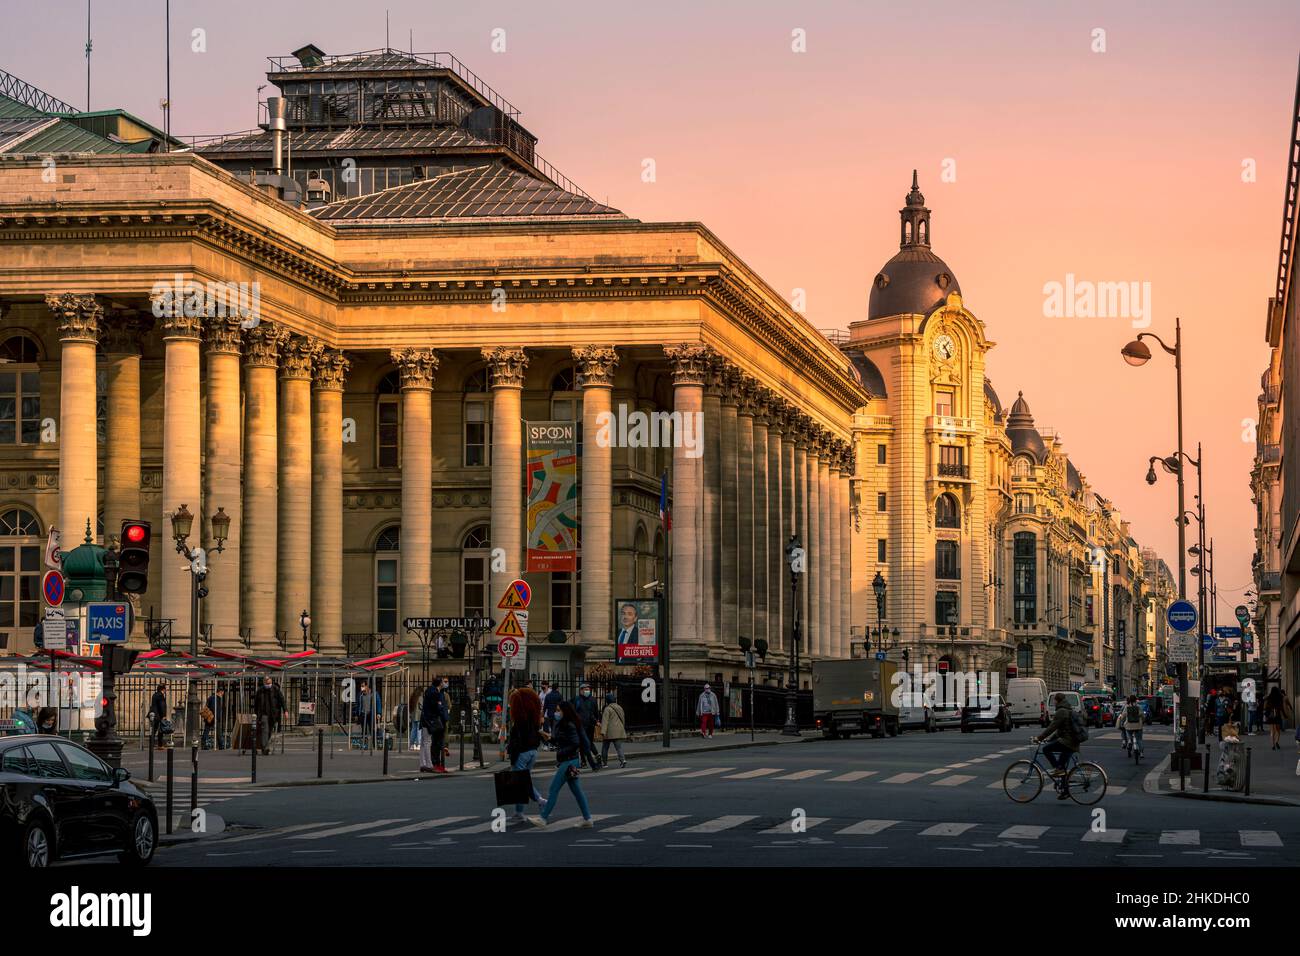 Paris, France - February 25, 2021: The Paris stock exchange and Reaumur street with its Haussmannian buildings in Paris Stock Photo